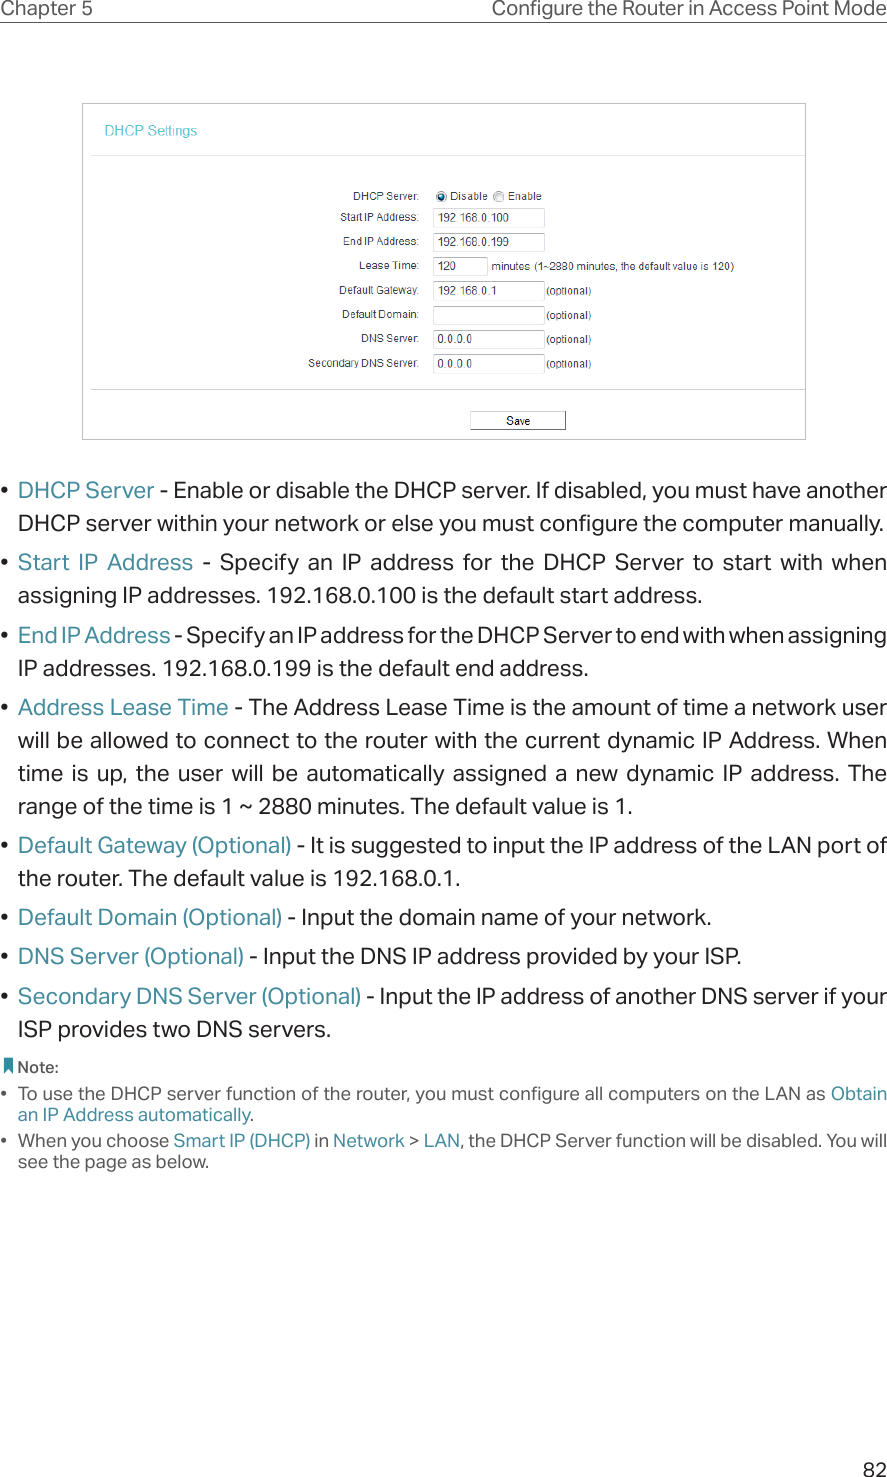 82Chapter 5 &amp;RQƮJXUHWKH5RXWHULQ$FFHVV3RLQW0RGH•  DHCP Server - Enable or disable the DHCP server. If disabled, you must have another DHCP server within your network or else you must configure the computer manually.•  Start IP Address - Specify an IP address for the DHCP Server to start with when assigning IP addresses. 192.168.0.100 is the default start address.•  End IP Address - Specify an IP address for the DHCP Server to end with when assigning IP addresses. 192.168.0.199 is the default end address.•  Address Lease Time - The Address Lease Time is the amount of time a network user will be allowed to connect to the router with the current dynamic IP Address. When time is up, the user will be automatically assigned a new dynamic IP address. The range of the time is 1 ~ 2880 minutes. The default value is 1.•  Default Gateway (Optional) - It is suggested to input the IP address of the LAN port of the router. The default value is 192.168.0.1.•  Default Domain (Optional) - Input the domain name of your network.•  DNS Server (Optional) - Input the DNS IP address provided by your ISP.•  Secondary DNS Server (Optional) - Input the IP address of another DNS server if your ISP provides two DNS servers. Note:•  To use the DHCP server function of the router, you must configure all computers on the LAN as Obtain an IP Address automatically.• When you choose Smart IP (DHCP) in Network &gt; LAN, the DHCP Server function will be disabled. You will see the page as below.